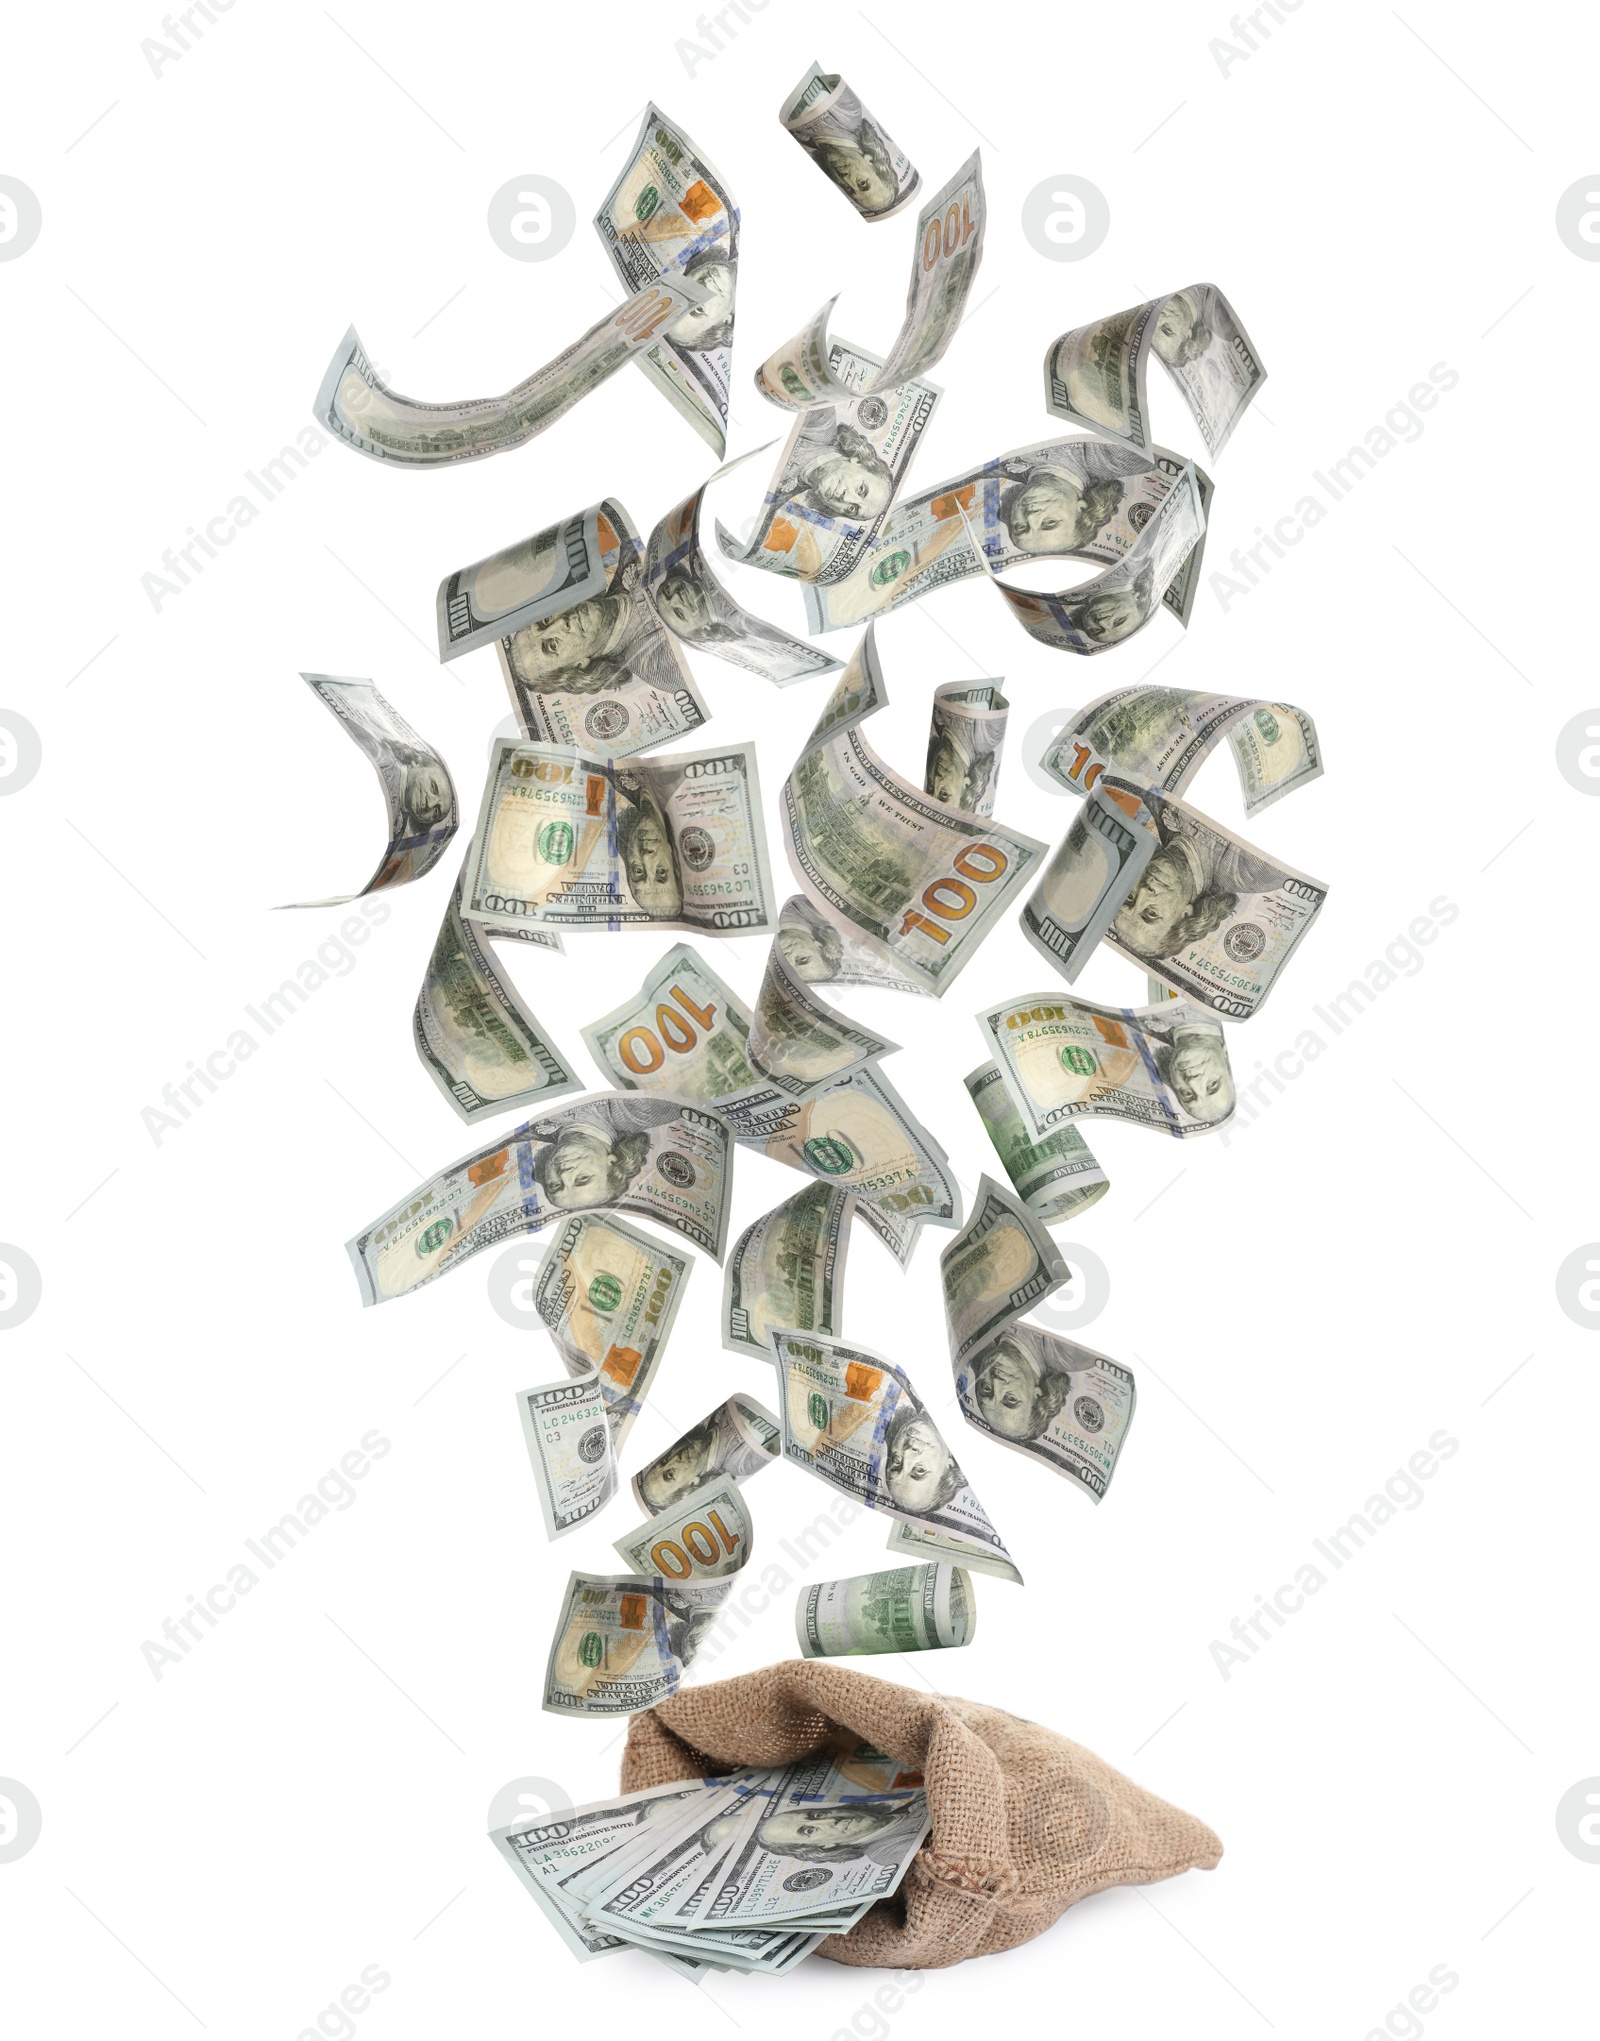 Image of Sack and American dollars on white background. Flying money